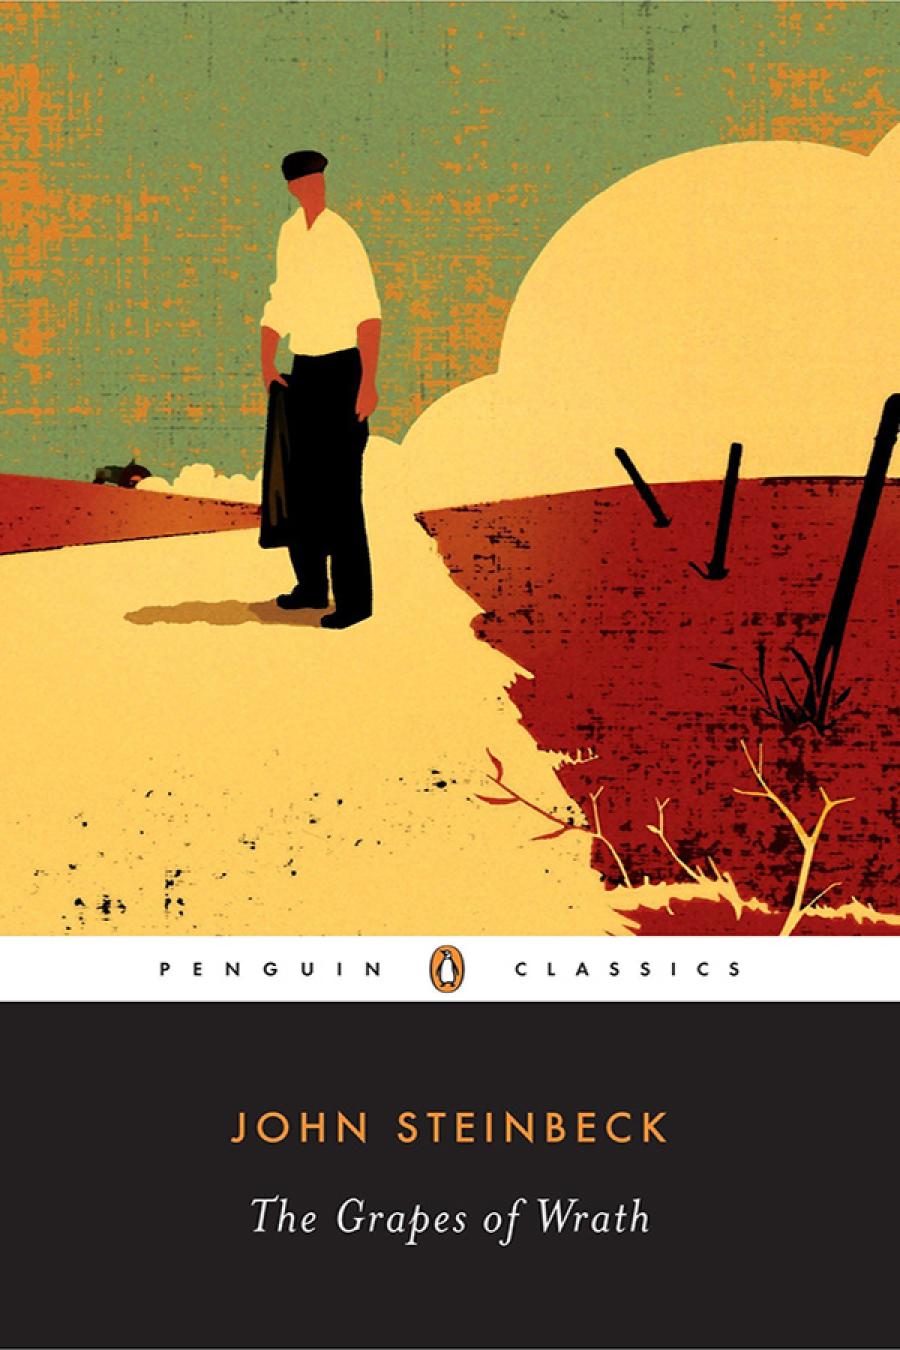 The Grapes of Wrath cover illustration with man on dusty trail